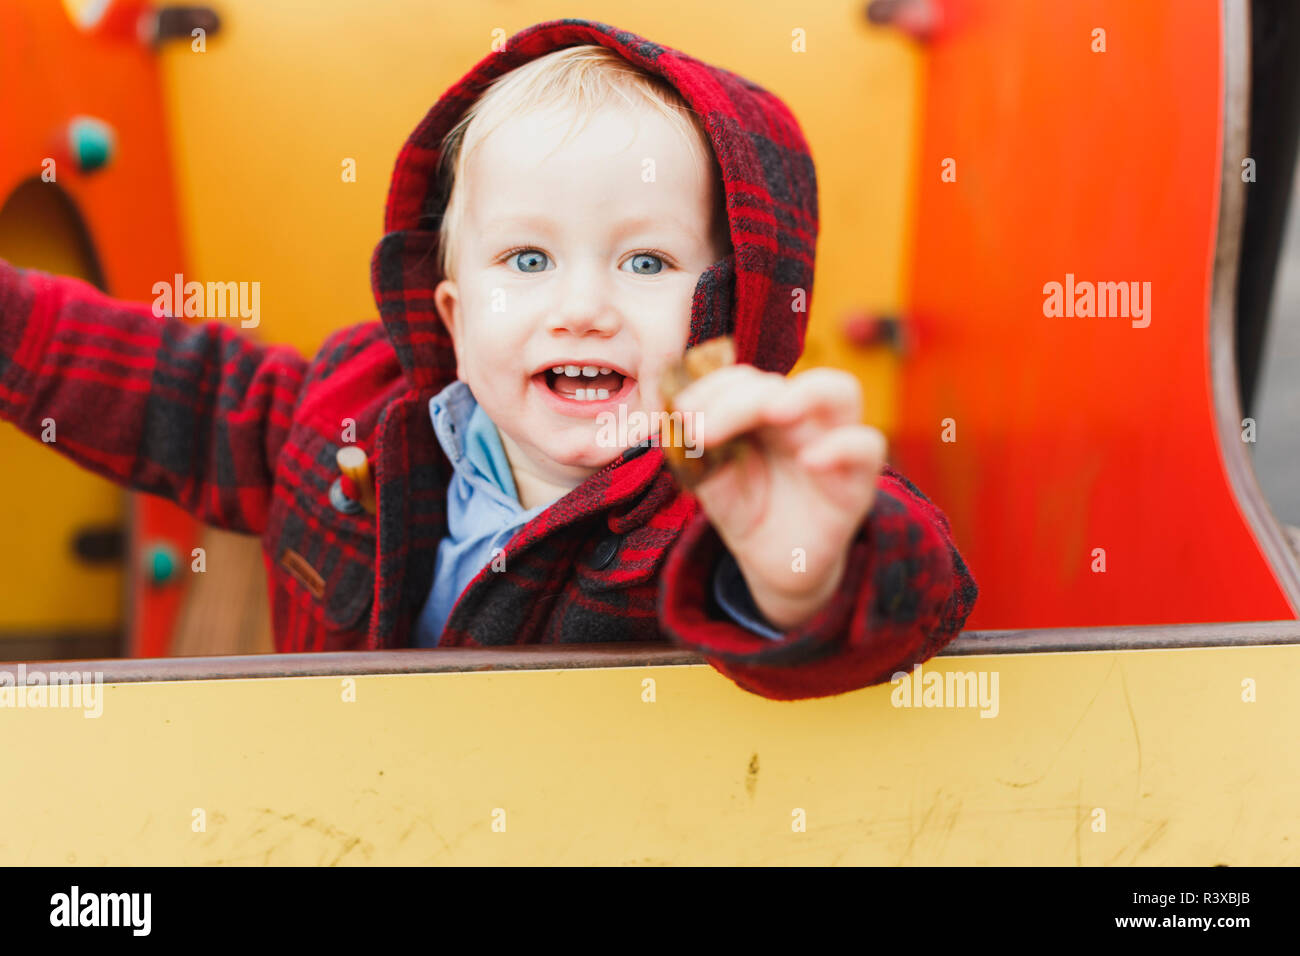 Baby laughing funny while playing on the floor. Stock Photo